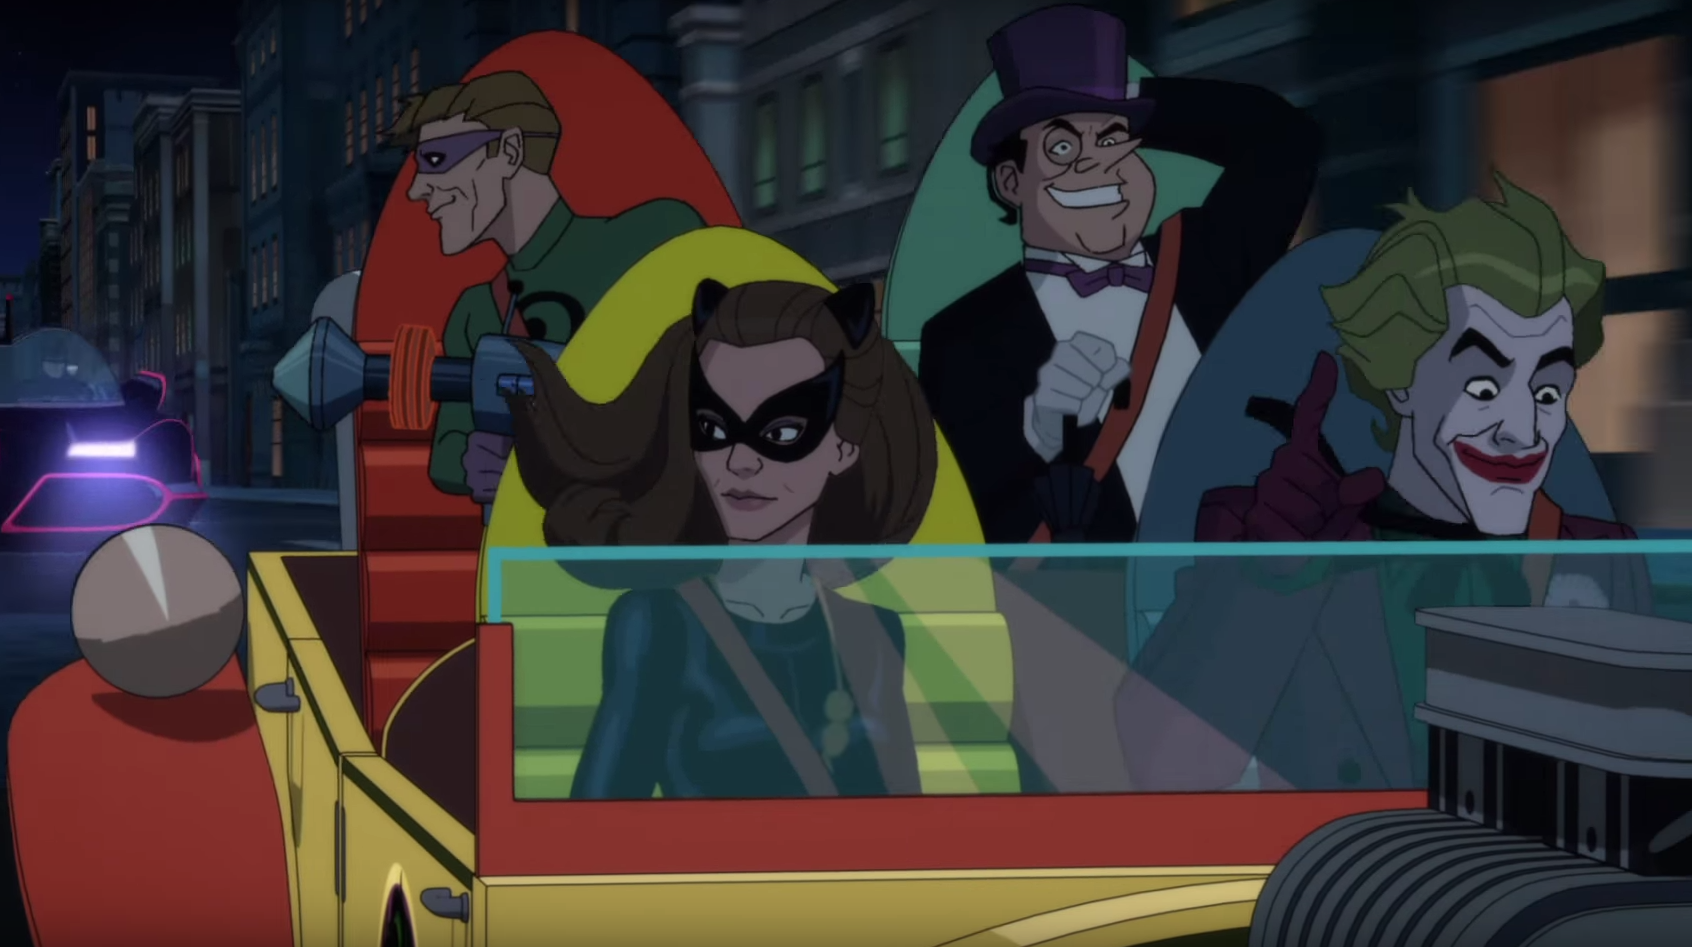 Batman: Return Of The Caped Crusaders trailer and art stop jaywalking -  SciFiNow - Science Fiction, Fantasy and Horror